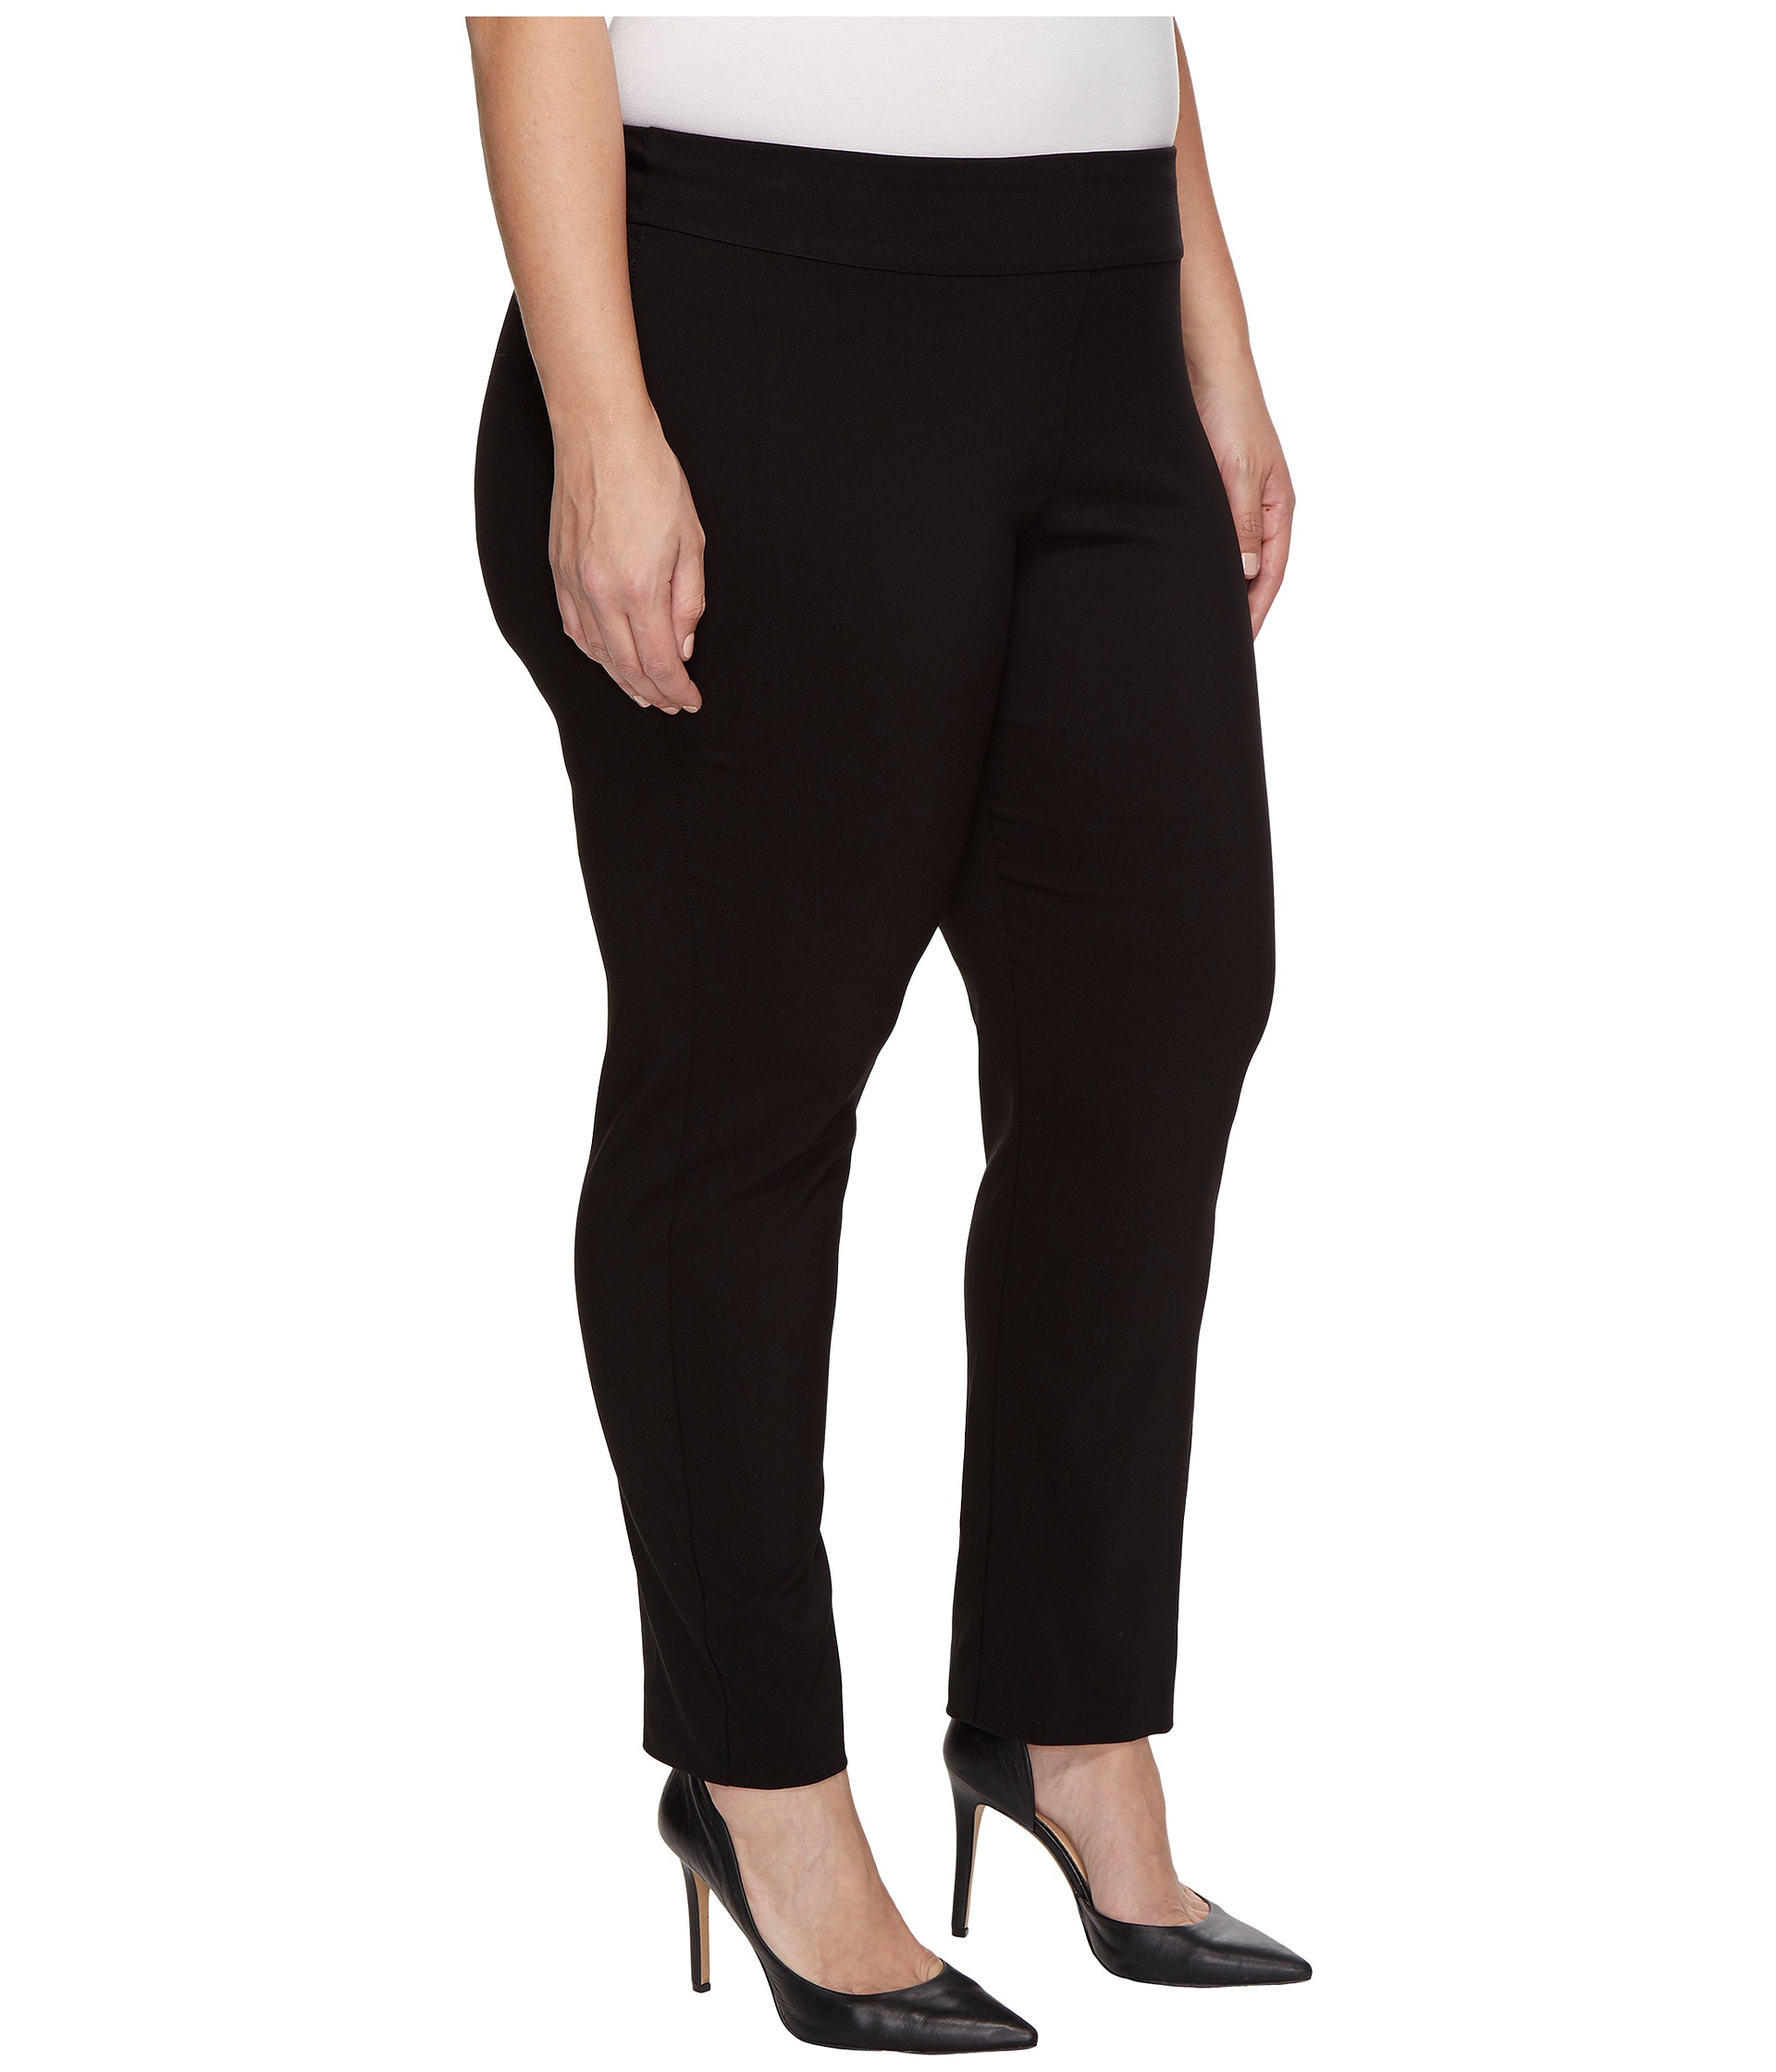 Krazy Larry Plus Size Pull-On Ankle Pants at Zappos.com